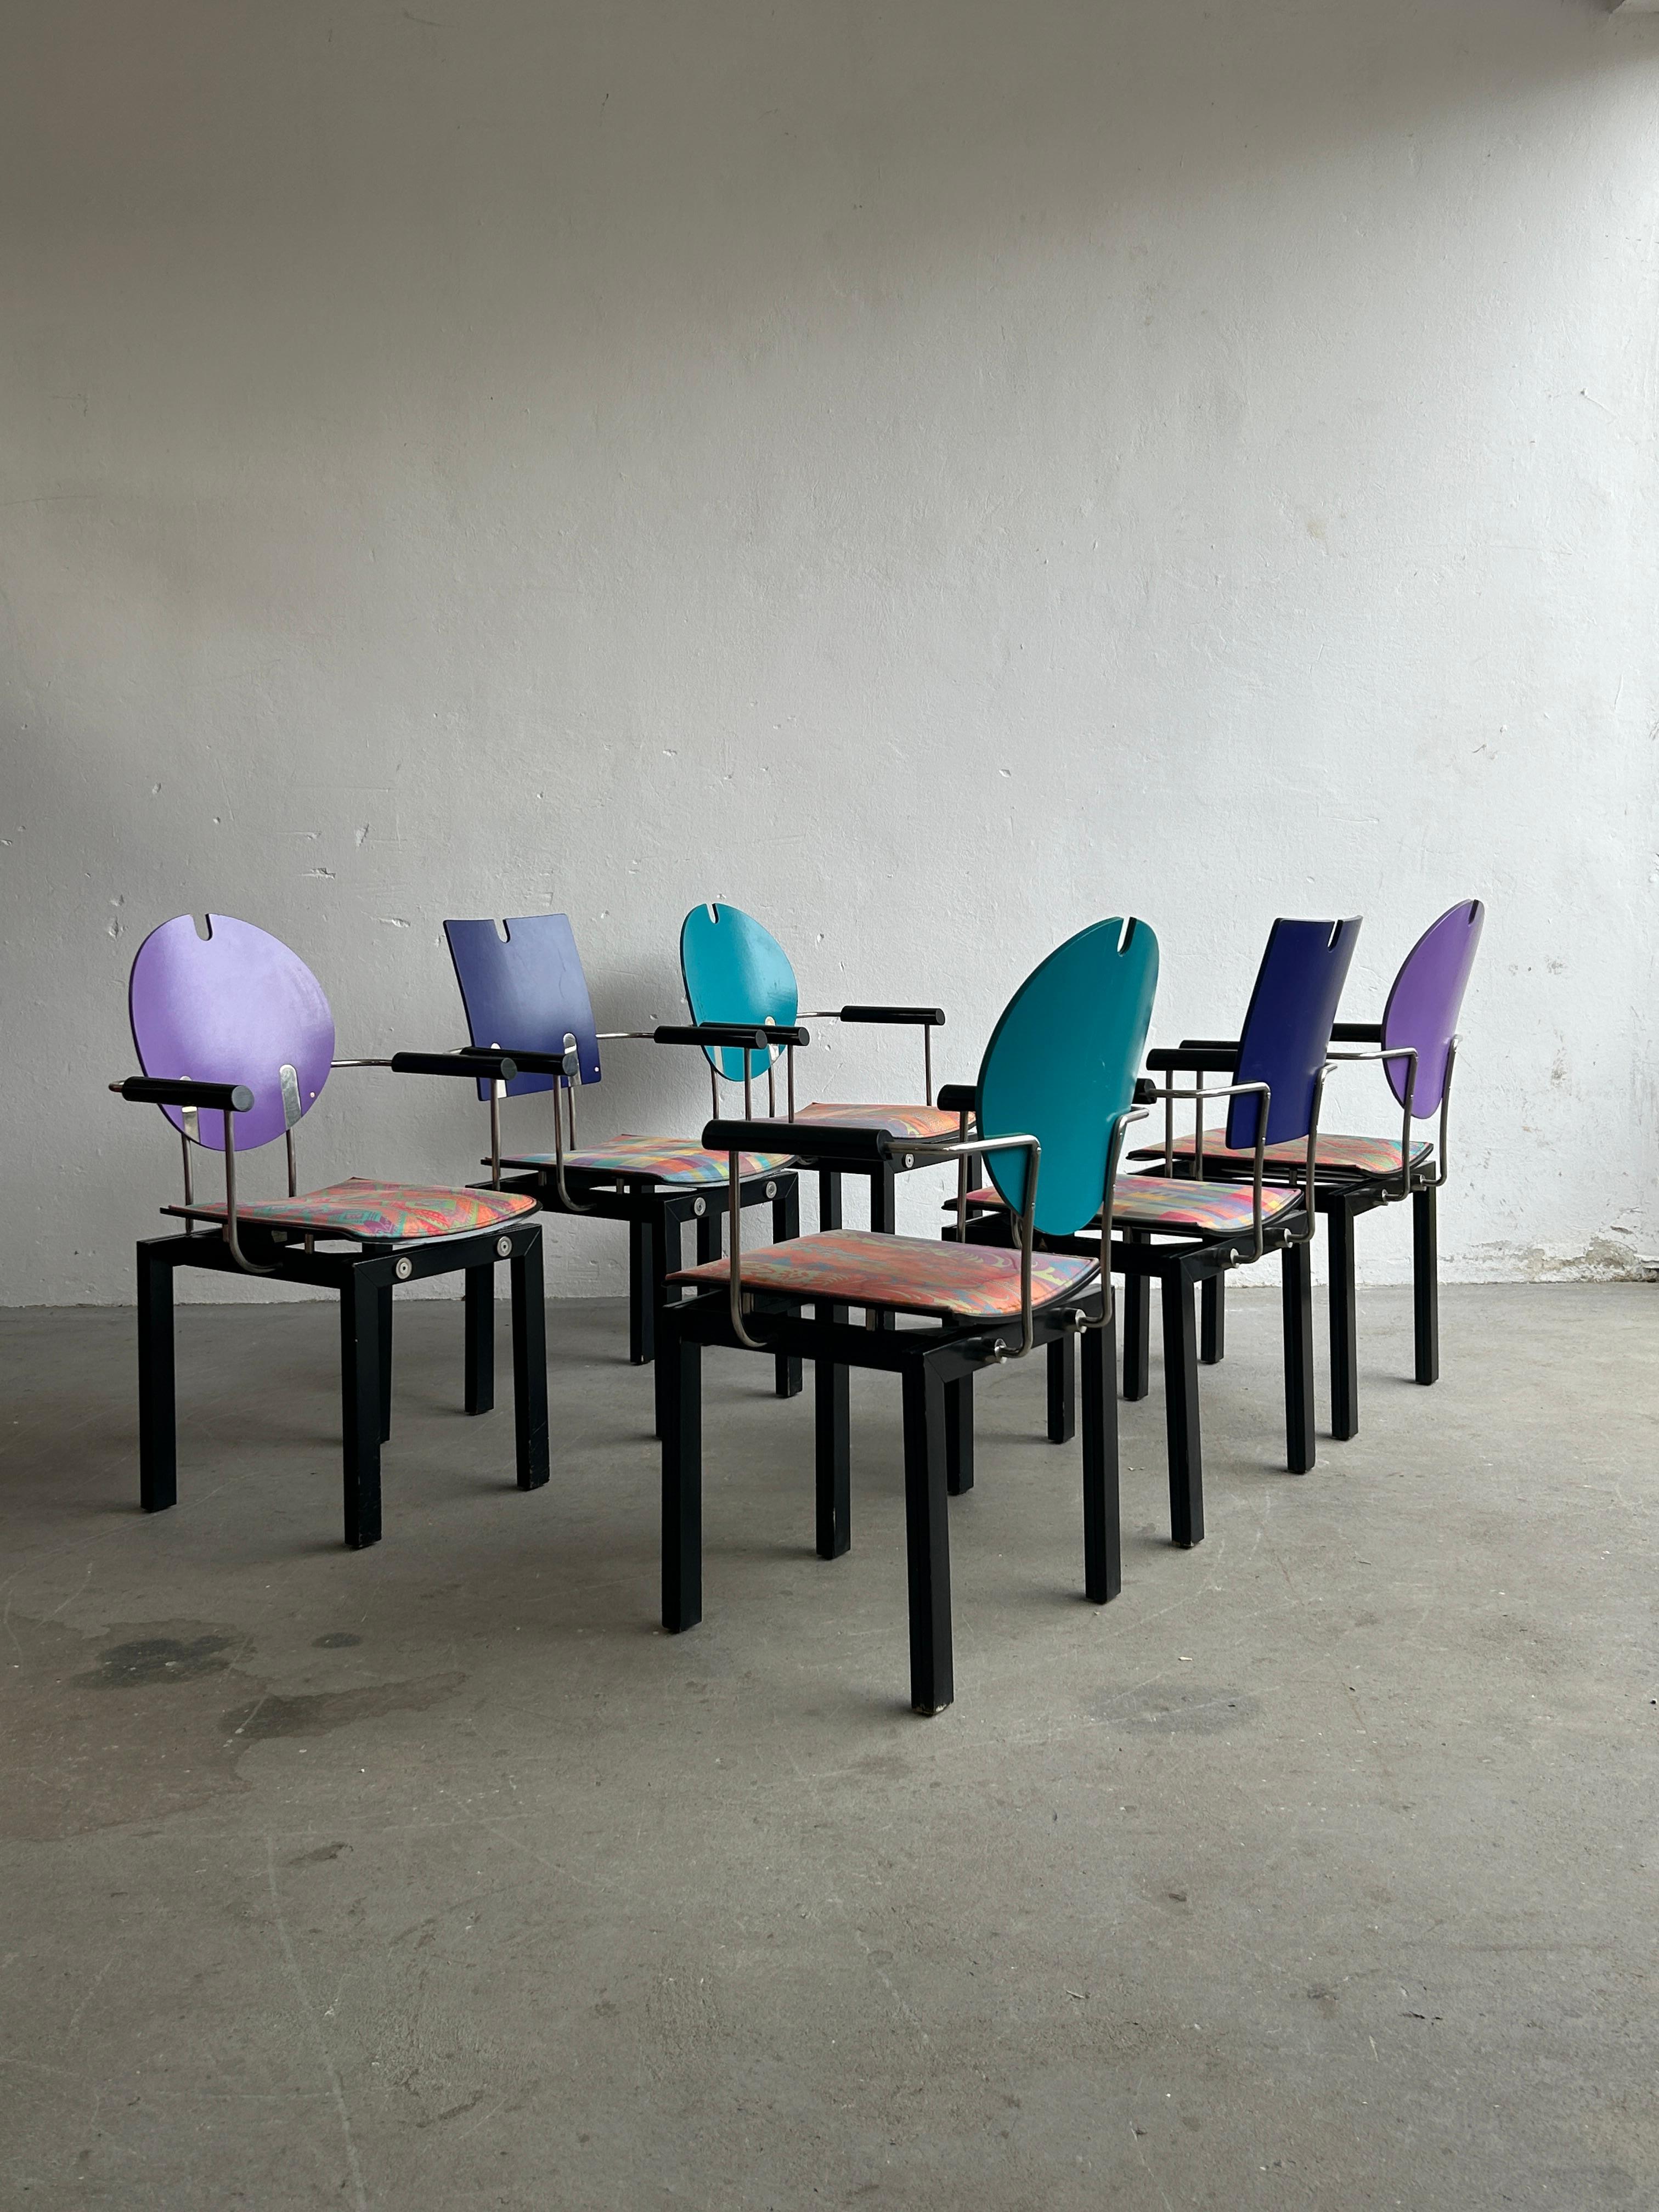 Exceptionally rare and collectible set of six postmodern Memphis era, original Thonet Vienna dining chairs. Sculptural, geometrically shaped colourful structure.
Produced by Thonet Vienna in 1994.

The set includes all six chairs in the photos,